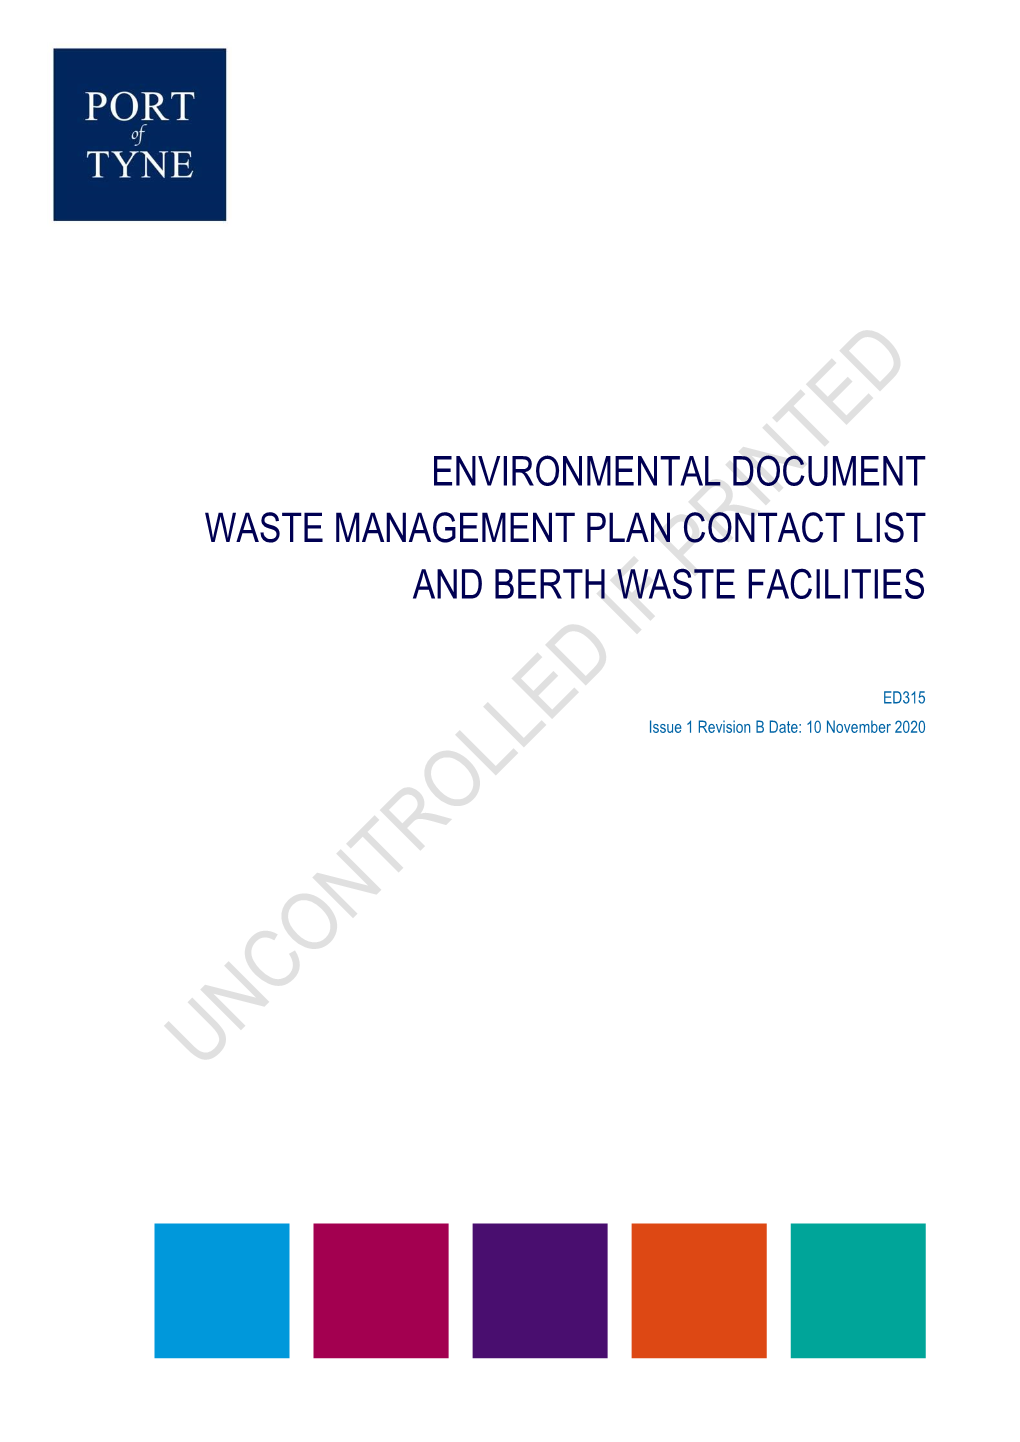 Environmental Document Waste Management Plan Contact List and Berth Waste Facilities